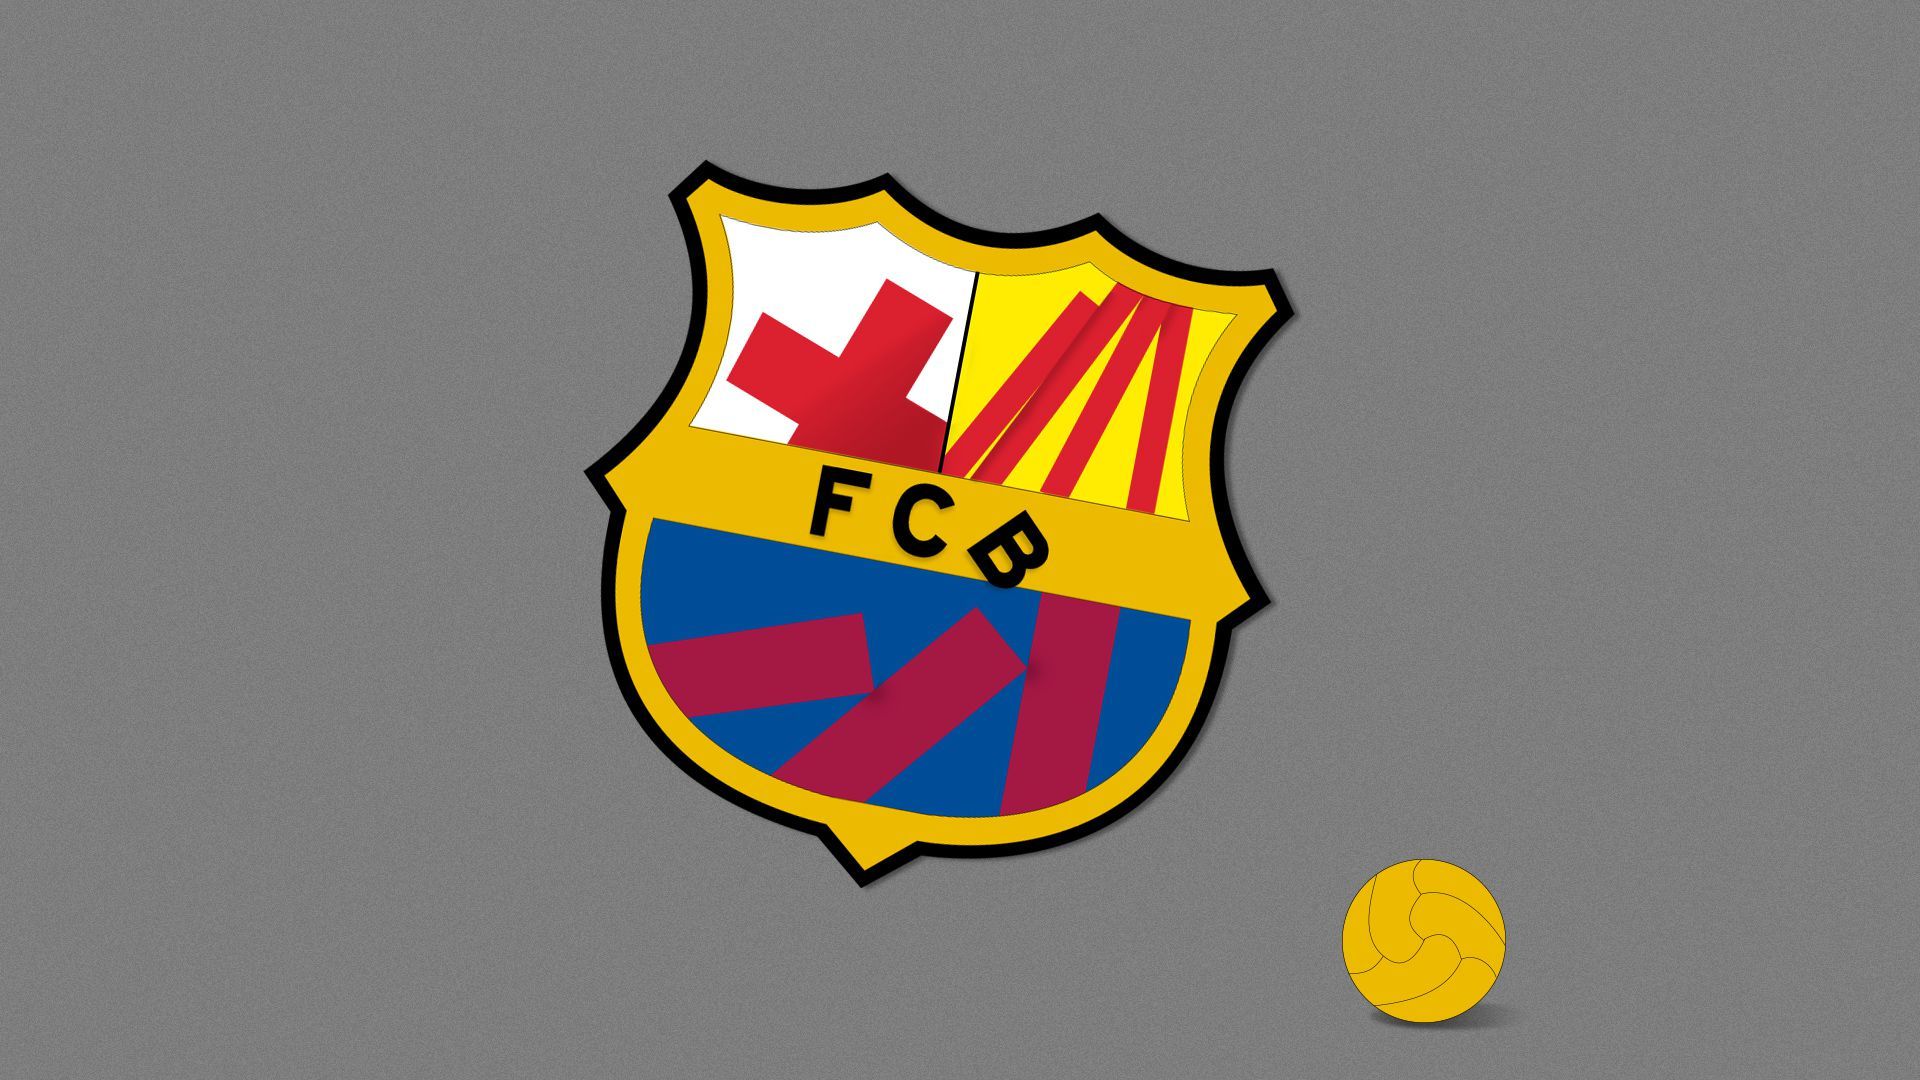 Illustration of the FC Barcelona shield logo hanging askew and falling apart